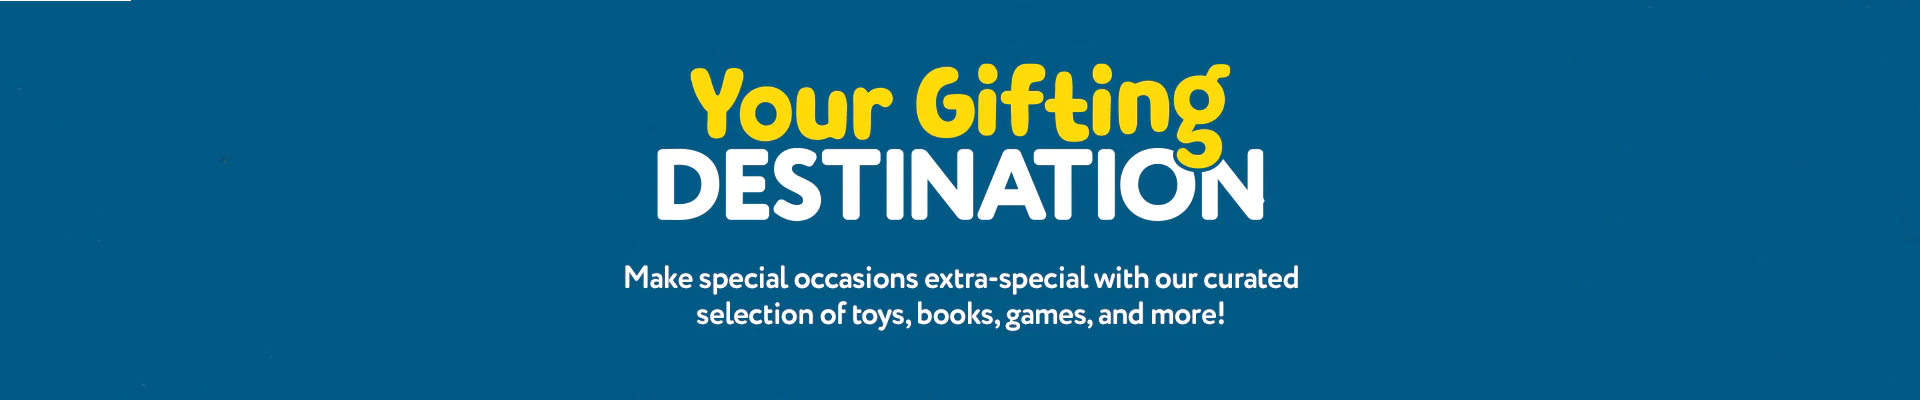 Your gifting destination.  Make special occasions extra-special with out curated selection of toys, books, games, and more!